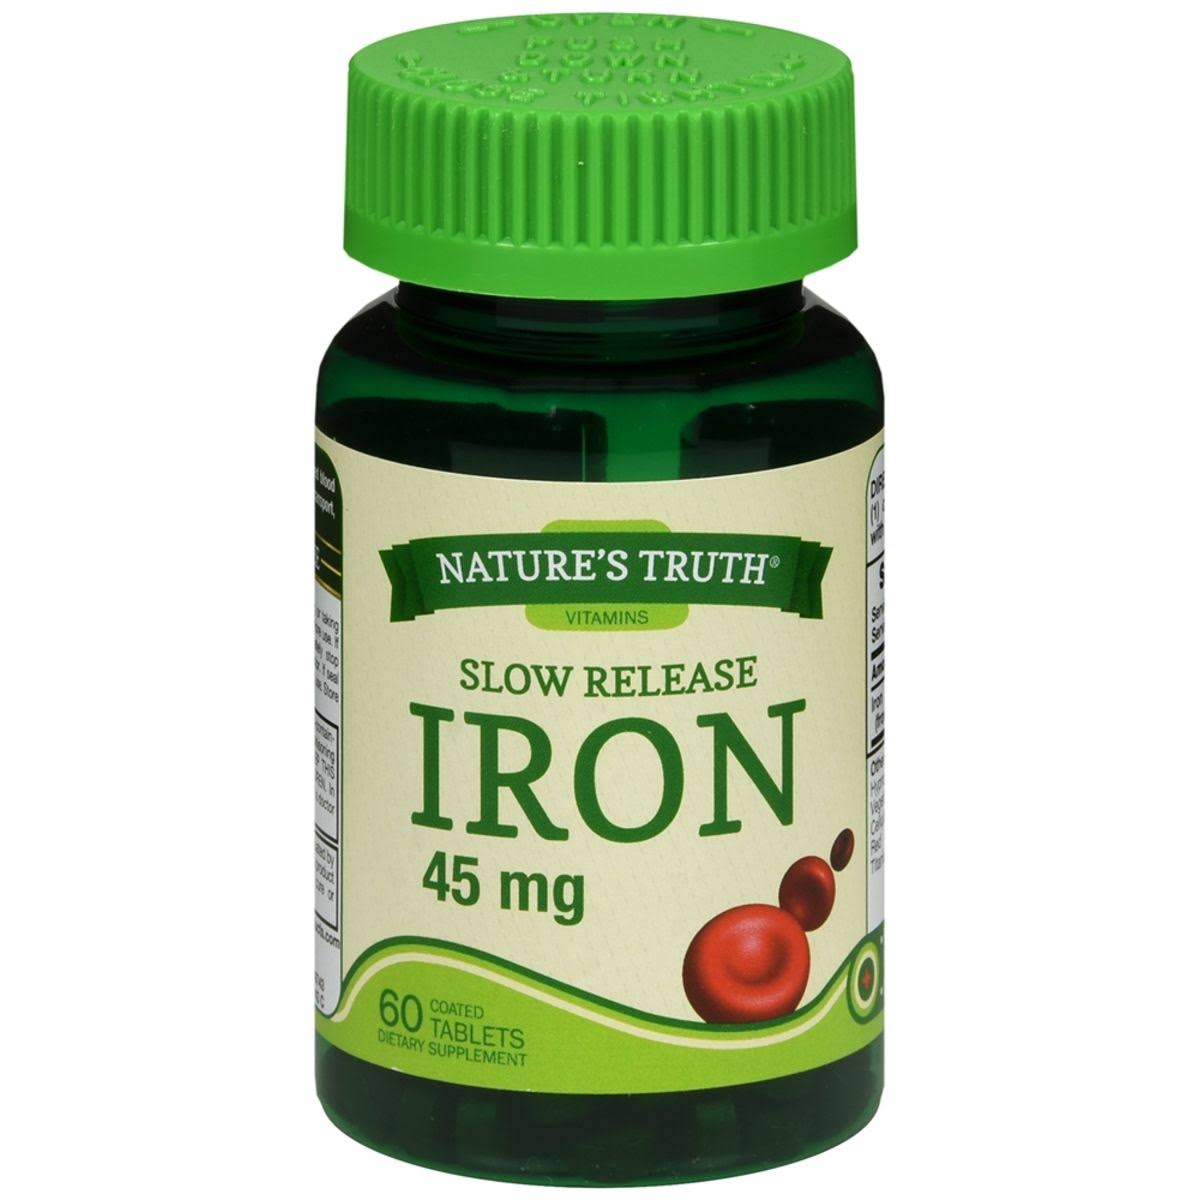 Nature's Truth Iron 45 mg Dietary Supplement - 60 Tablets